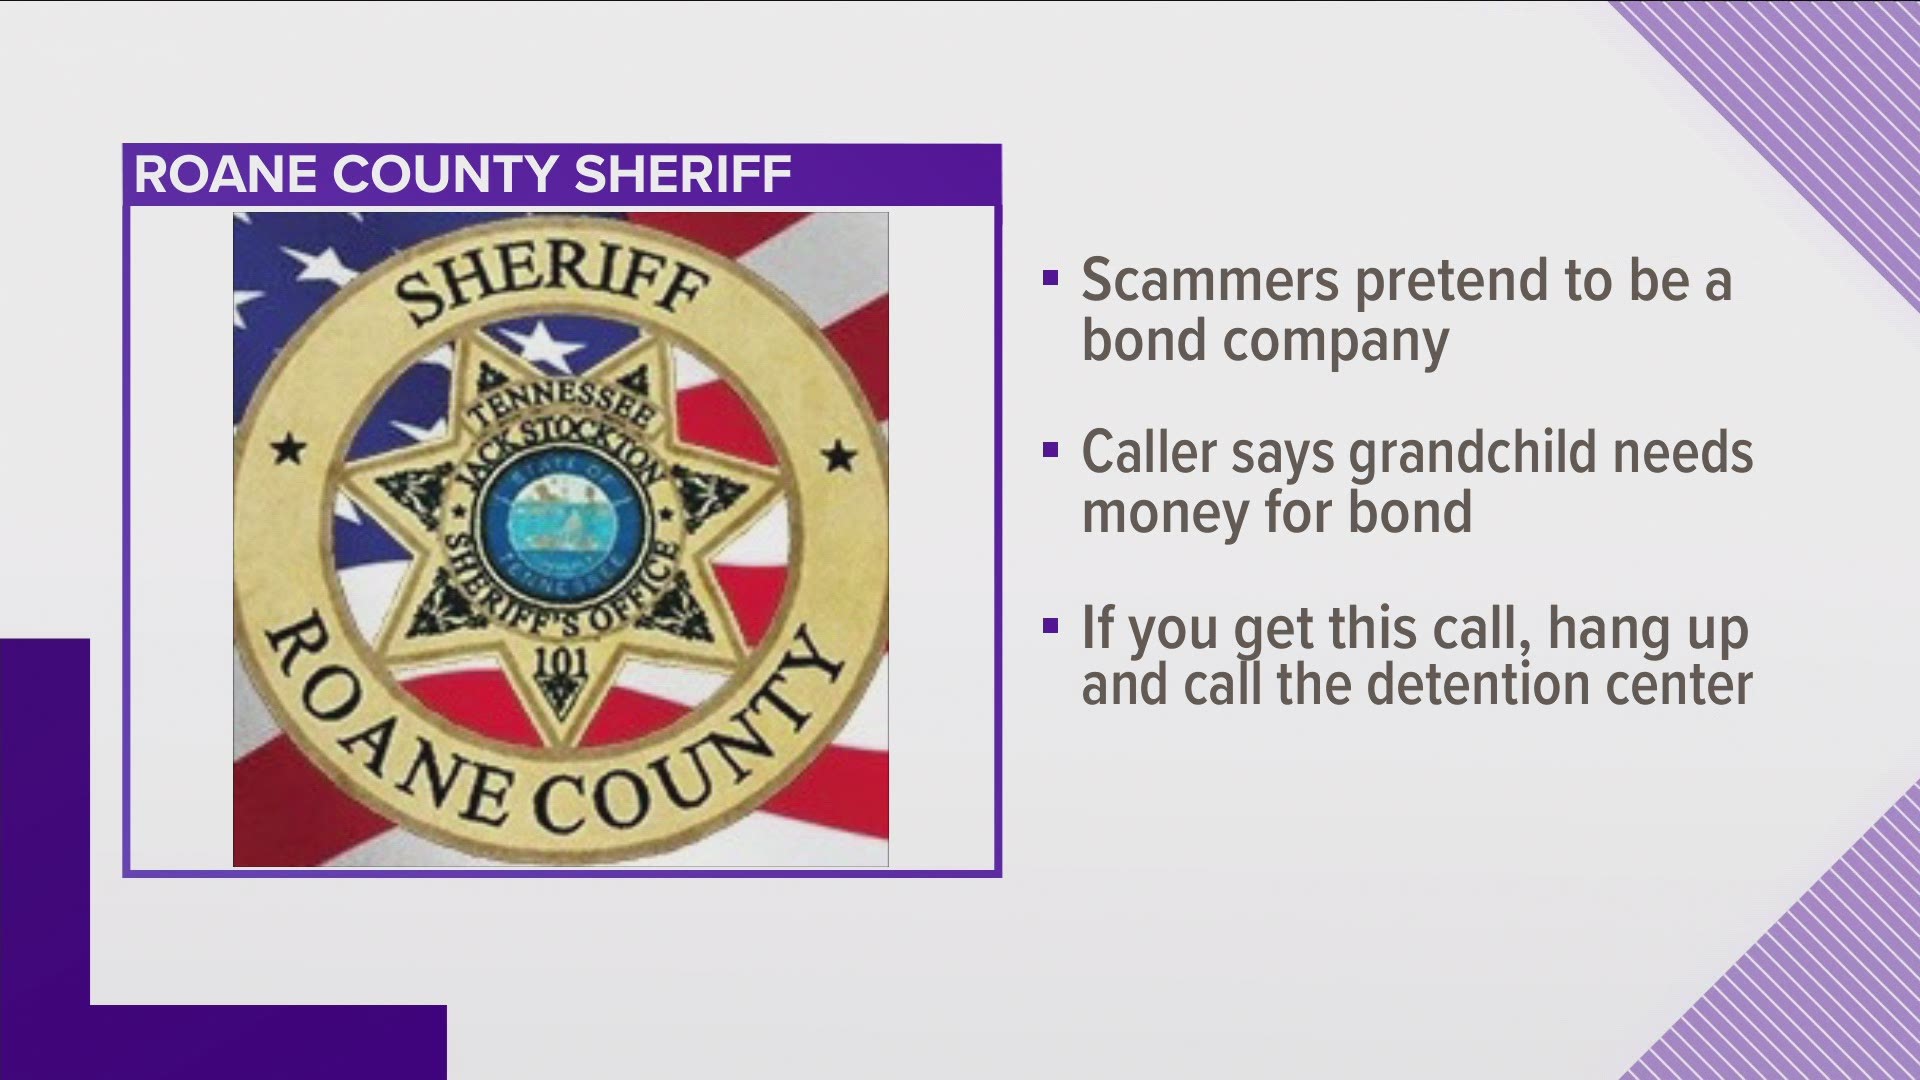 The sheriff said the scam caller pretends to be a grandchild that has been arrested needing bond money.